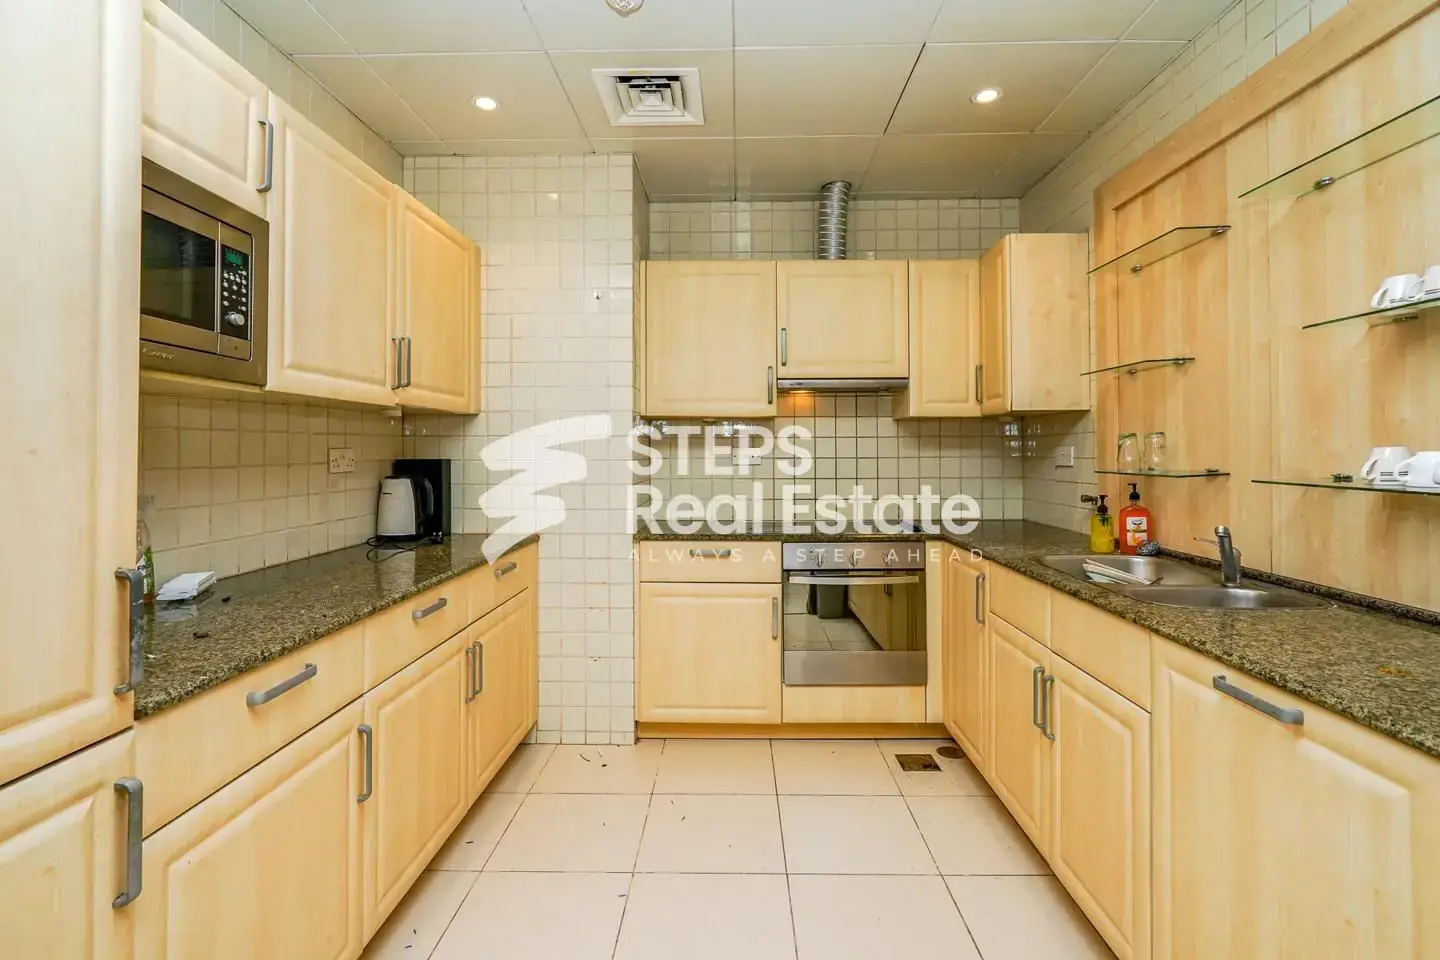 Great Offer! 1BR Apartment with 2 Balconies & Office